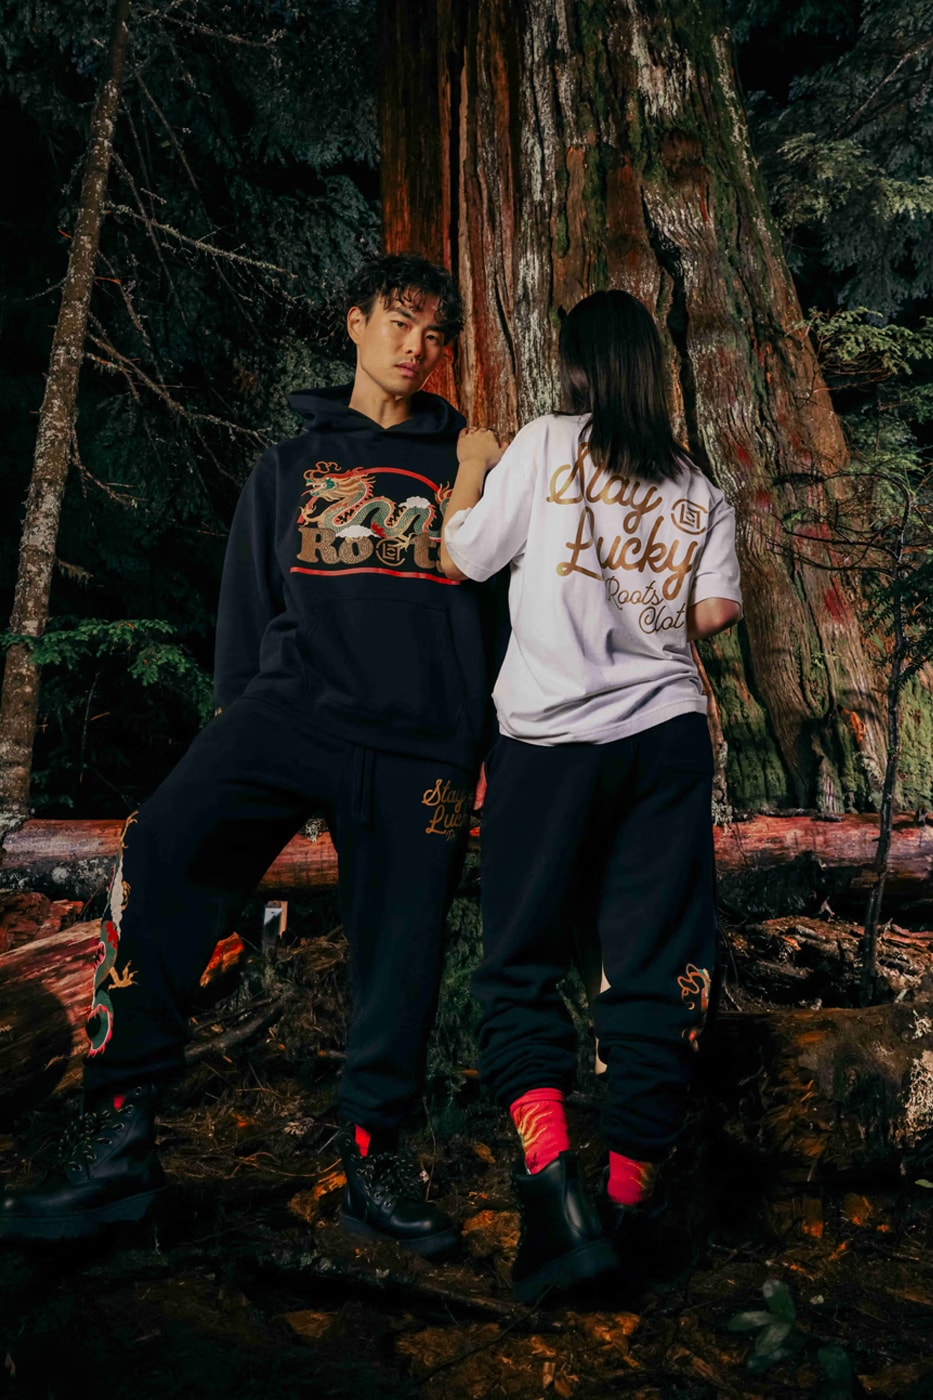 CLOT x Roots "Stay Lucky" Year of the Dragon Lunar New Year Capsule Collaboration Release Info